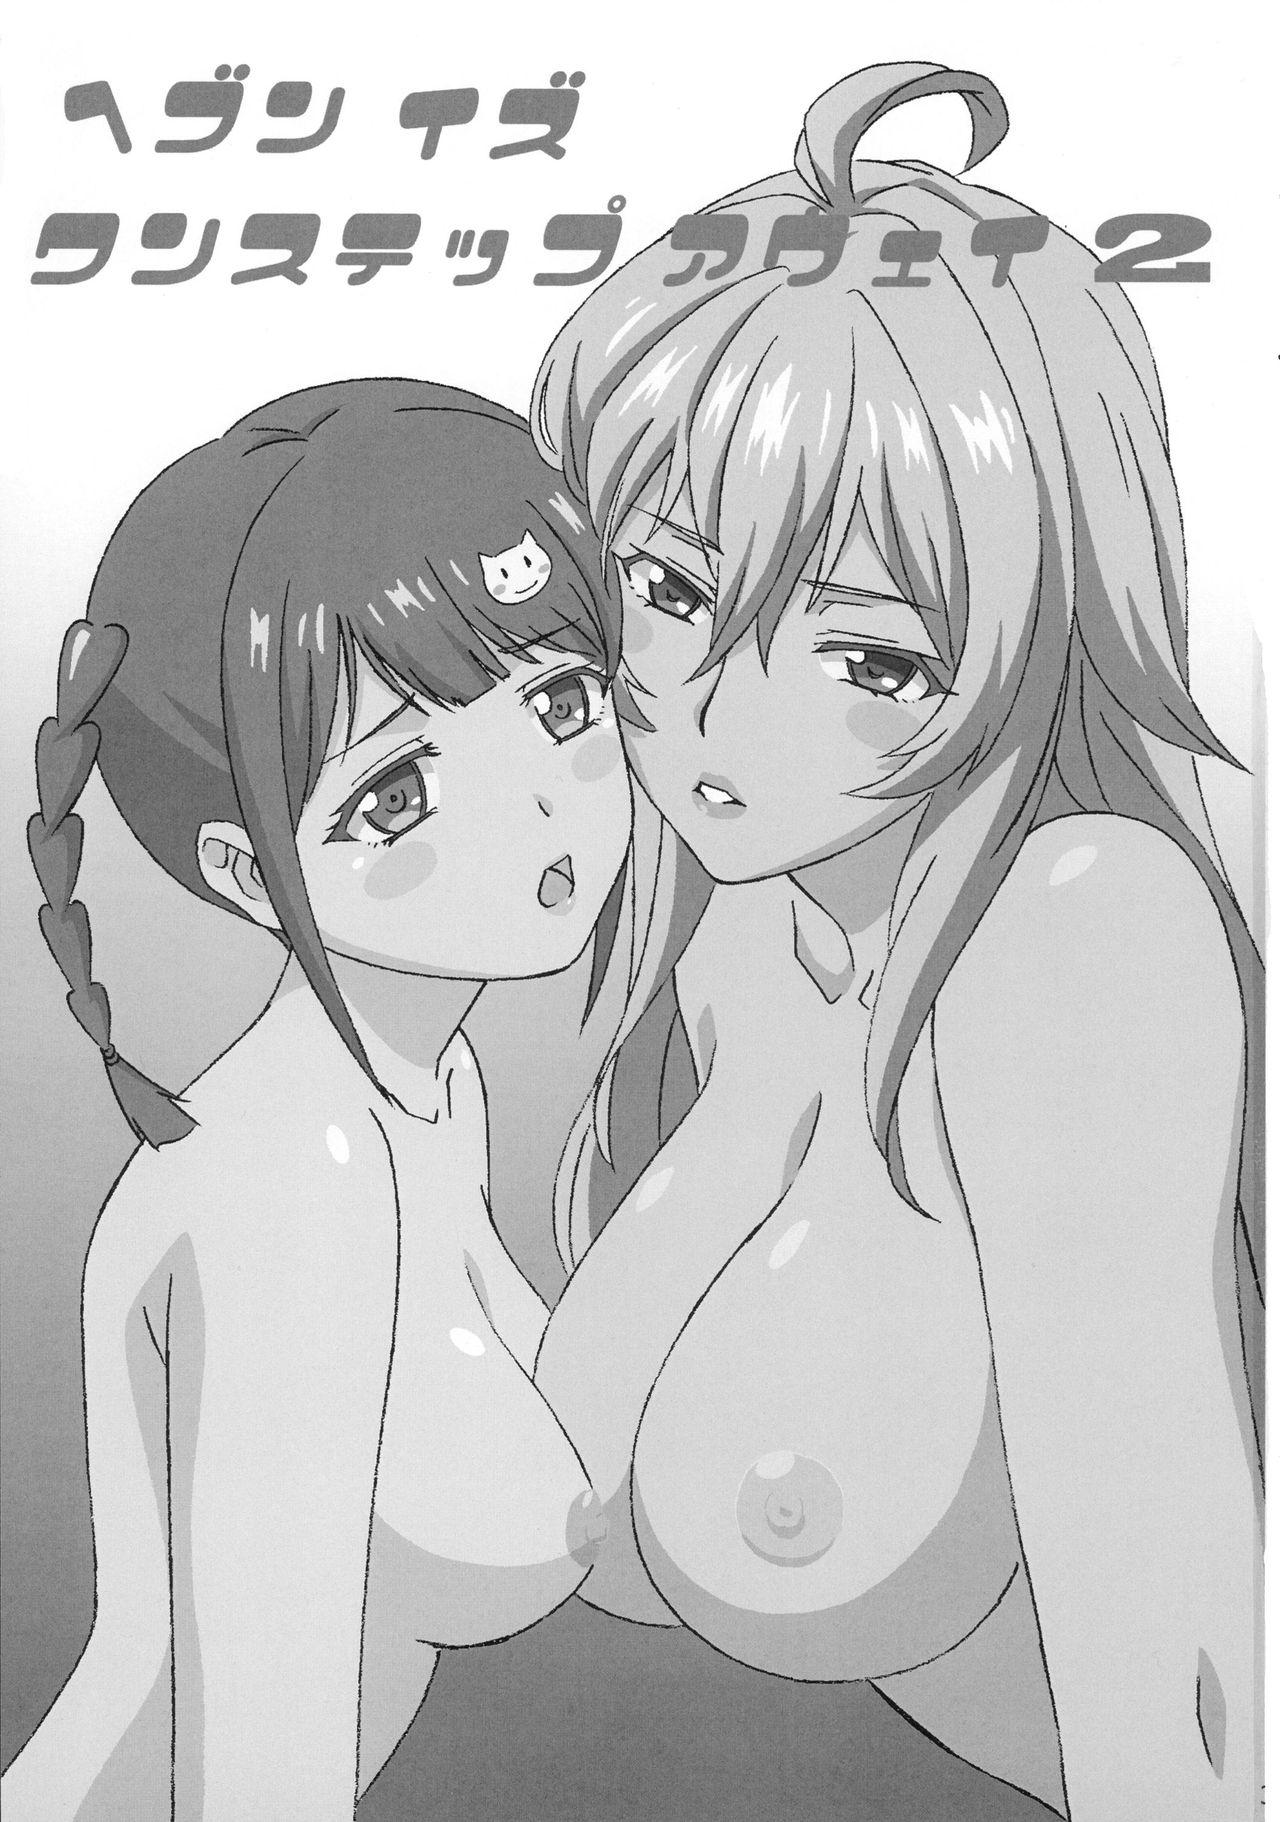 Perfect Ass Heaven is one step away 2 - Valkyrie drive Alternative - Page 3